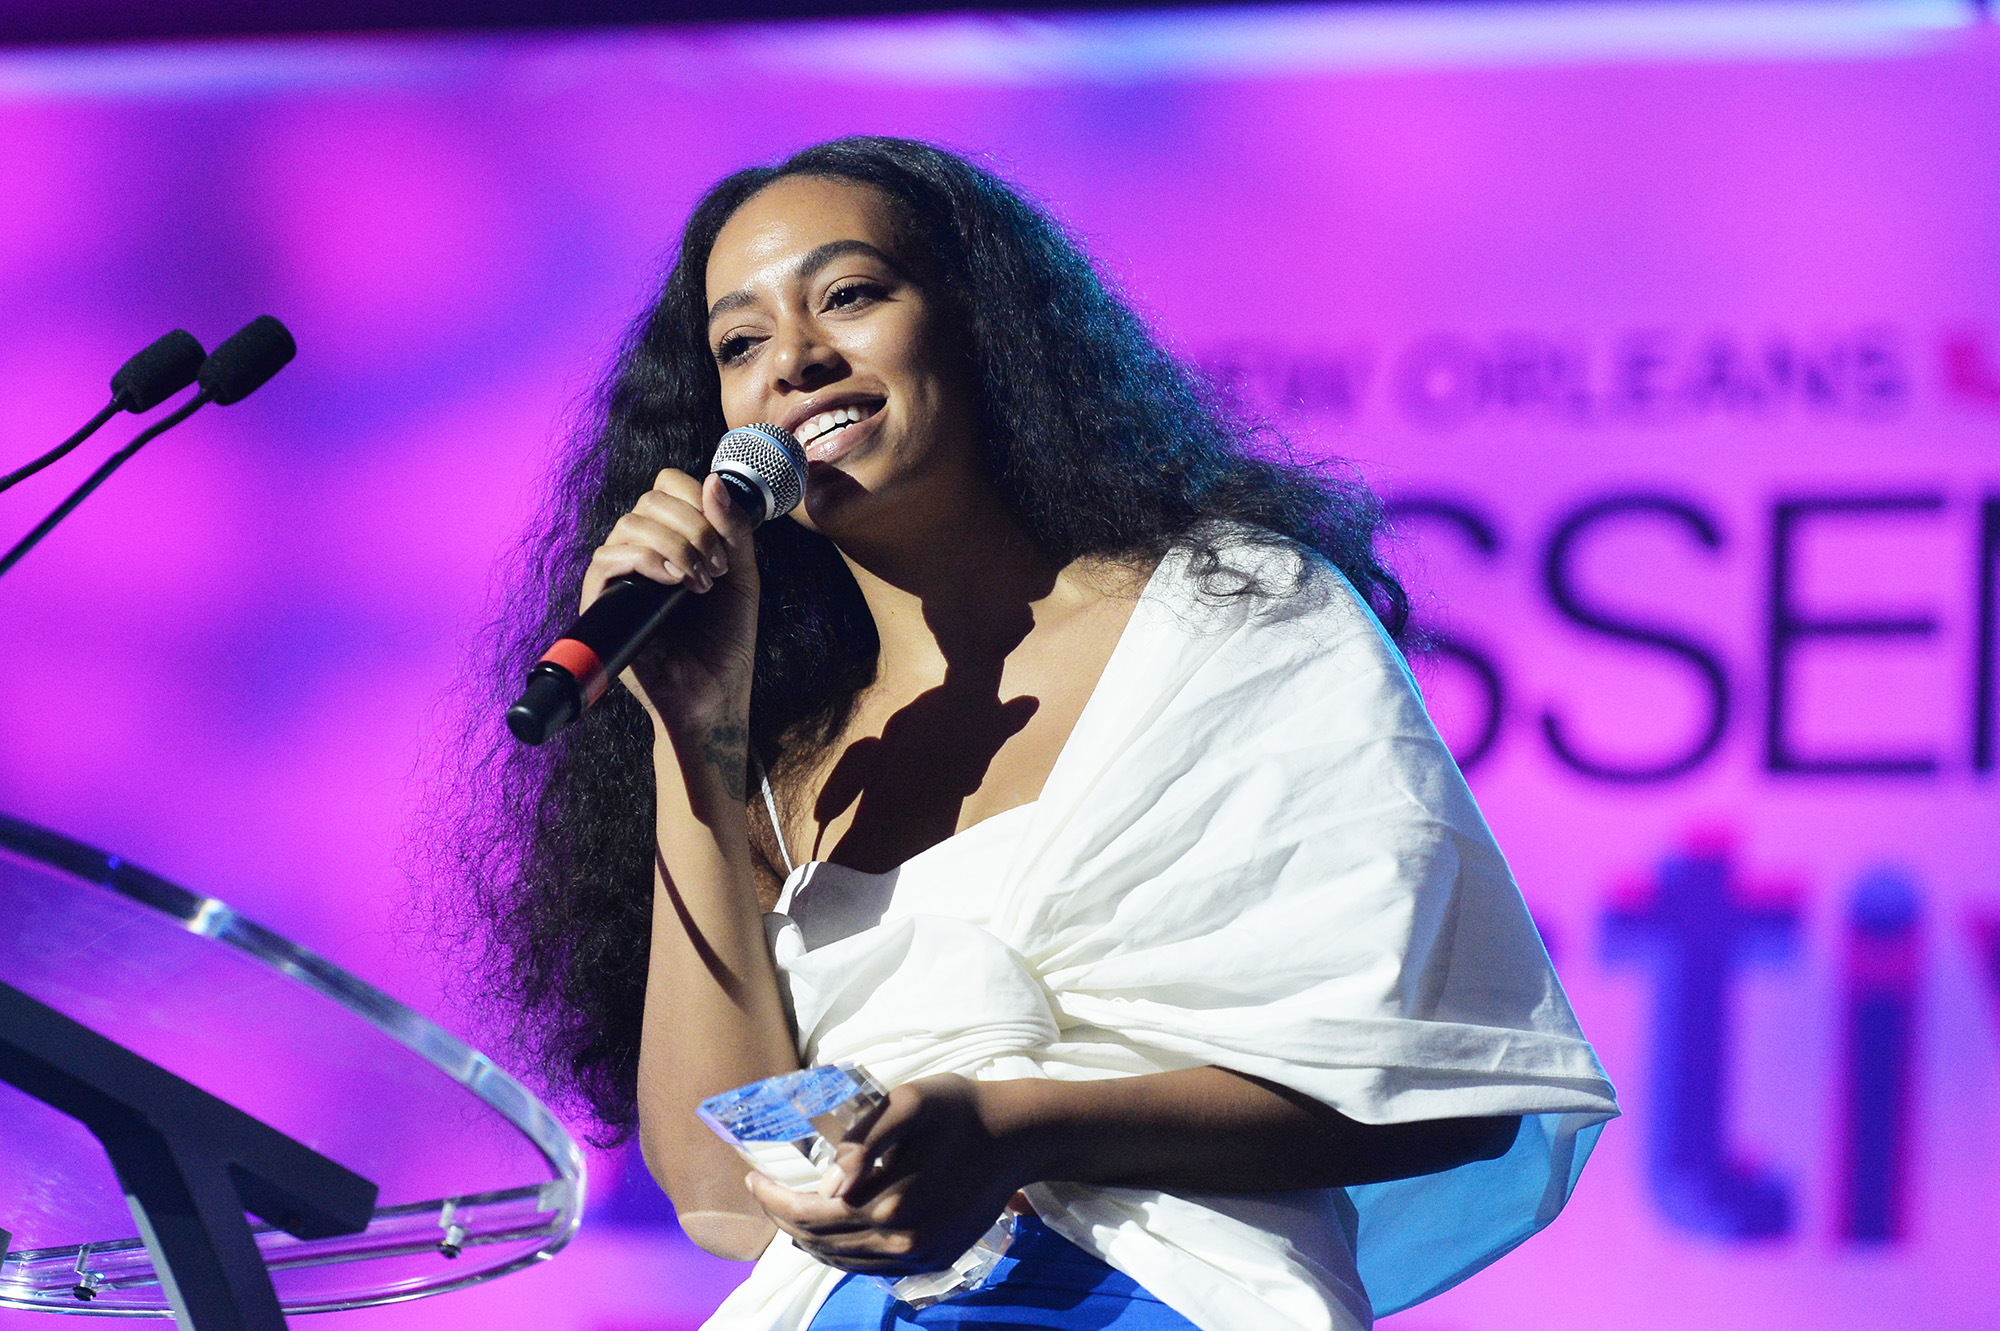 Solange Knowles speaks onstage at the 2016 ESSENCE Festival Presented By Coca-Cola at Ernest N. Morial Convention Center on July 3, 2016 in New Orleans, Louisiana. (Photo by Paras Griffin/Getty Images for 2016 Essence Festival) (Paras Griffin&mdash;Getty Images for 2016 Essence Fe)